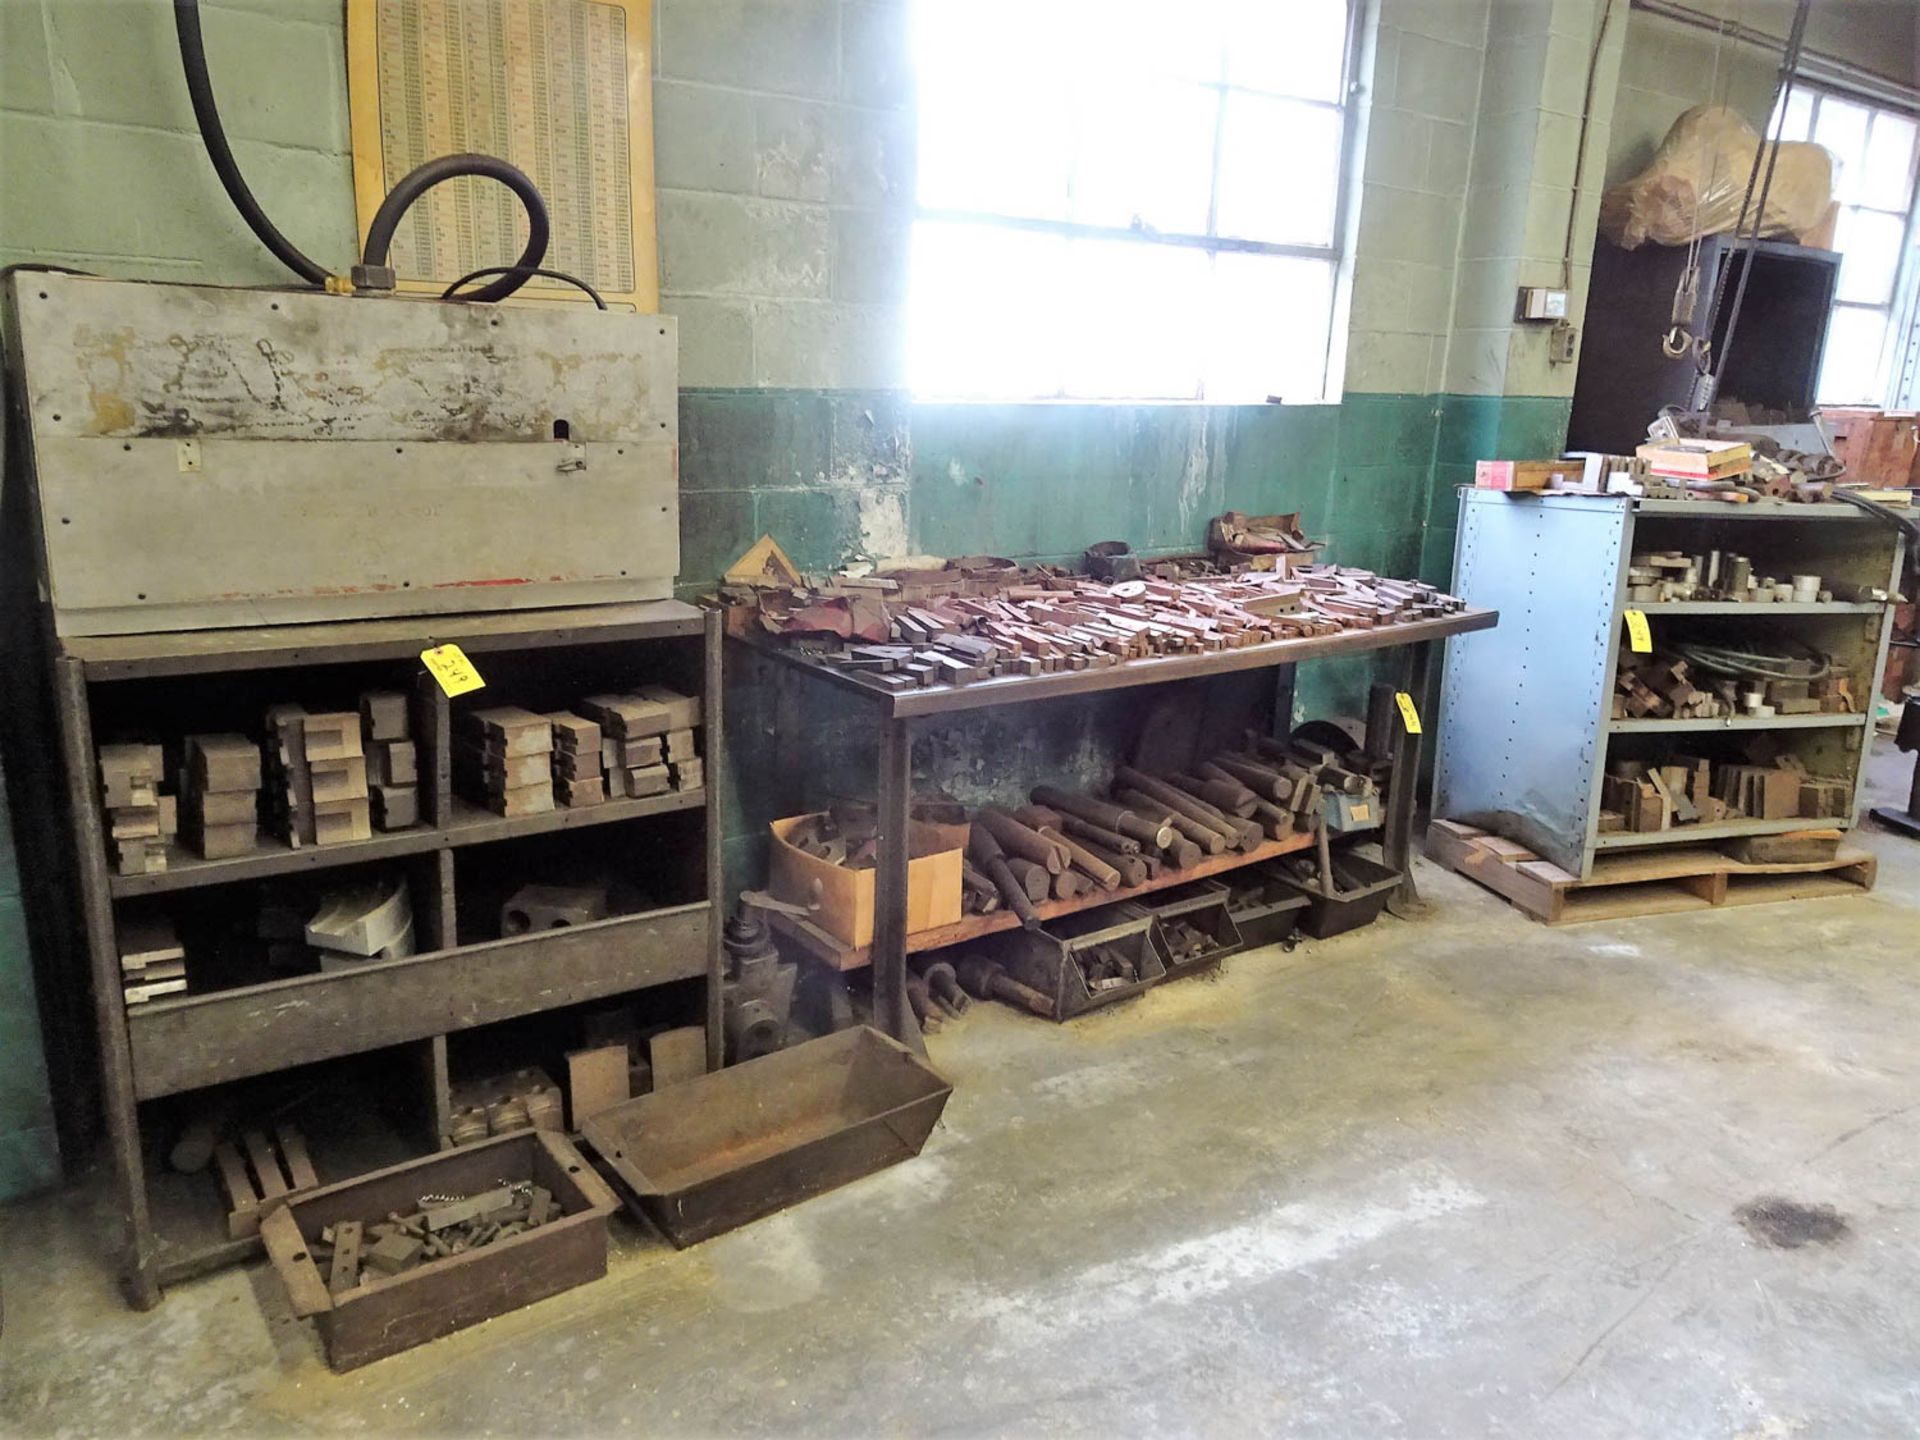 (3) SHELVING UNITS, (1) STEEL LEGGED STEEL TOPPED WORK BENCH WITH CONTENTS, INCLUDING: CHUCK JAWS,